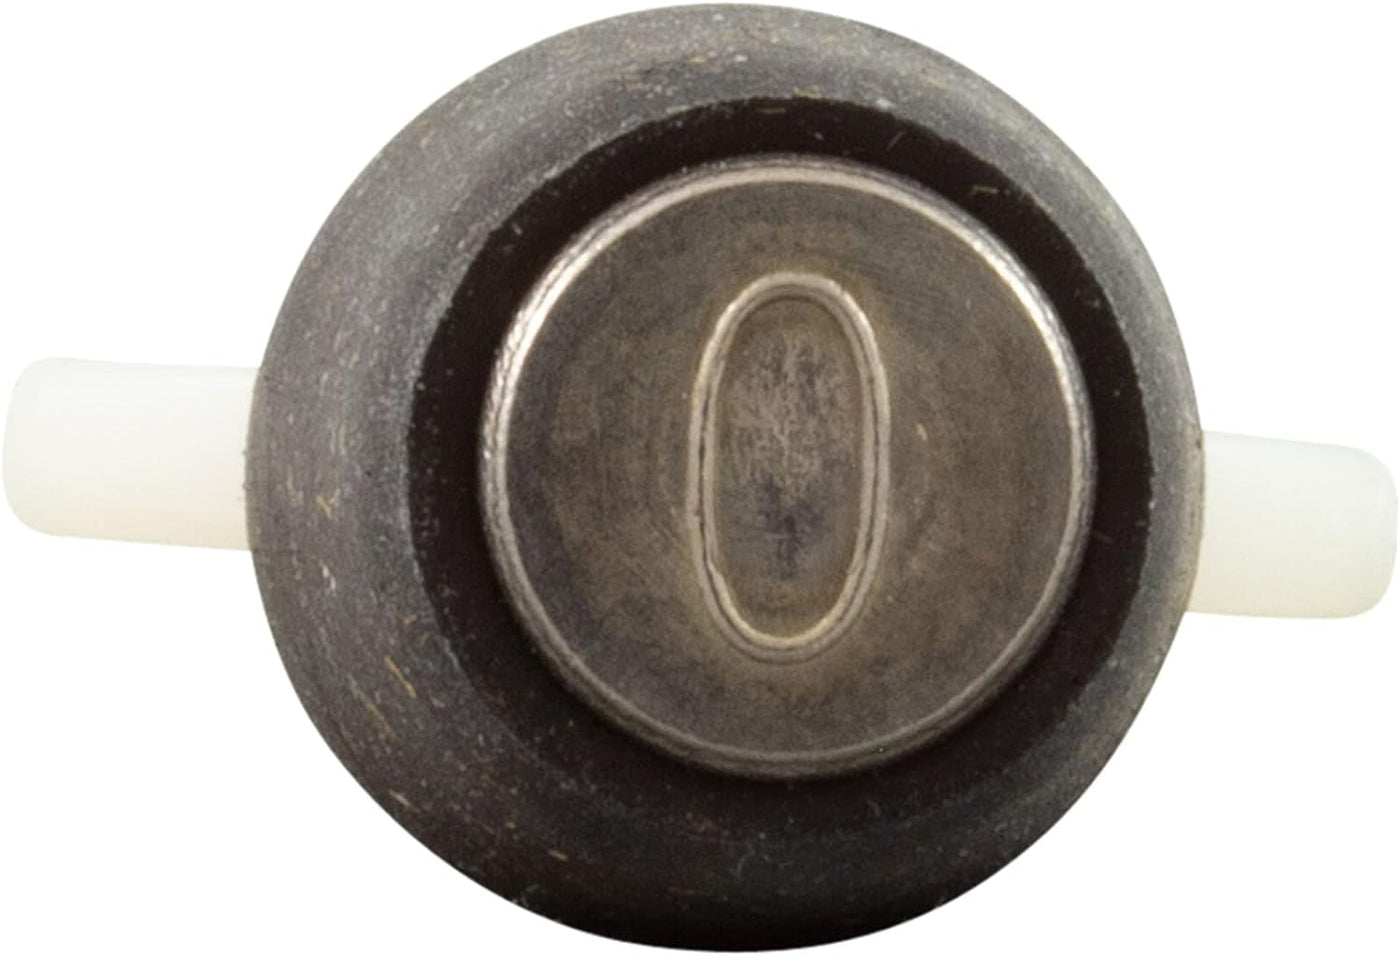 Technical Products #00 Winter Plug 1/2" P (Rubber Plug)